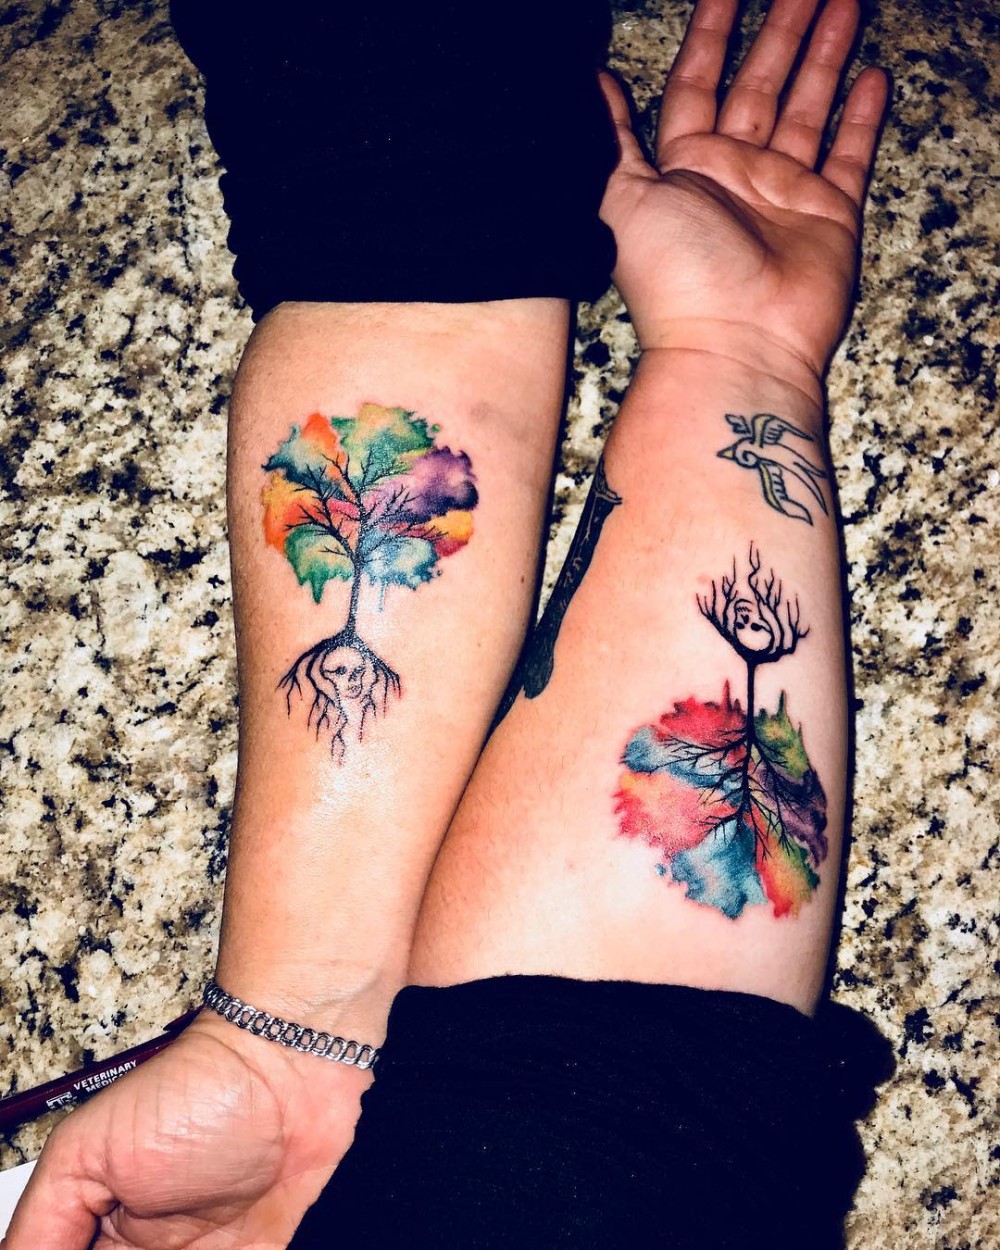 "matching tattoos with badass mom: 67+ meaningful design ideas for son and daughter family mom/mother/mum mother daughter tattoos on ankle mother son tattoos mother daughter tattoo quotes mother son daughter matching tattoos mother daughter symbol tattoo mom tattoos son and daughter tattoos mother daughter arrow tattoo mother daughter lotus tattoo meaning mother daughter flower tattoo twin daughter tattoo badass mother daughter tattoos mother daughter butterfly tattoos mother daughter infinity tattoos mother daughter flower tattoos mother and son symbols mother son music tattoos like mother, like son mother daughter elephant tattoos mother daughter tribal tattoos mother daughter granddaughter tattoos mother daughter dragonfly tattoos mother and child tattoo symbol mom and kids quotes mom tattoo mother son rose tattoo mother and son quotes "